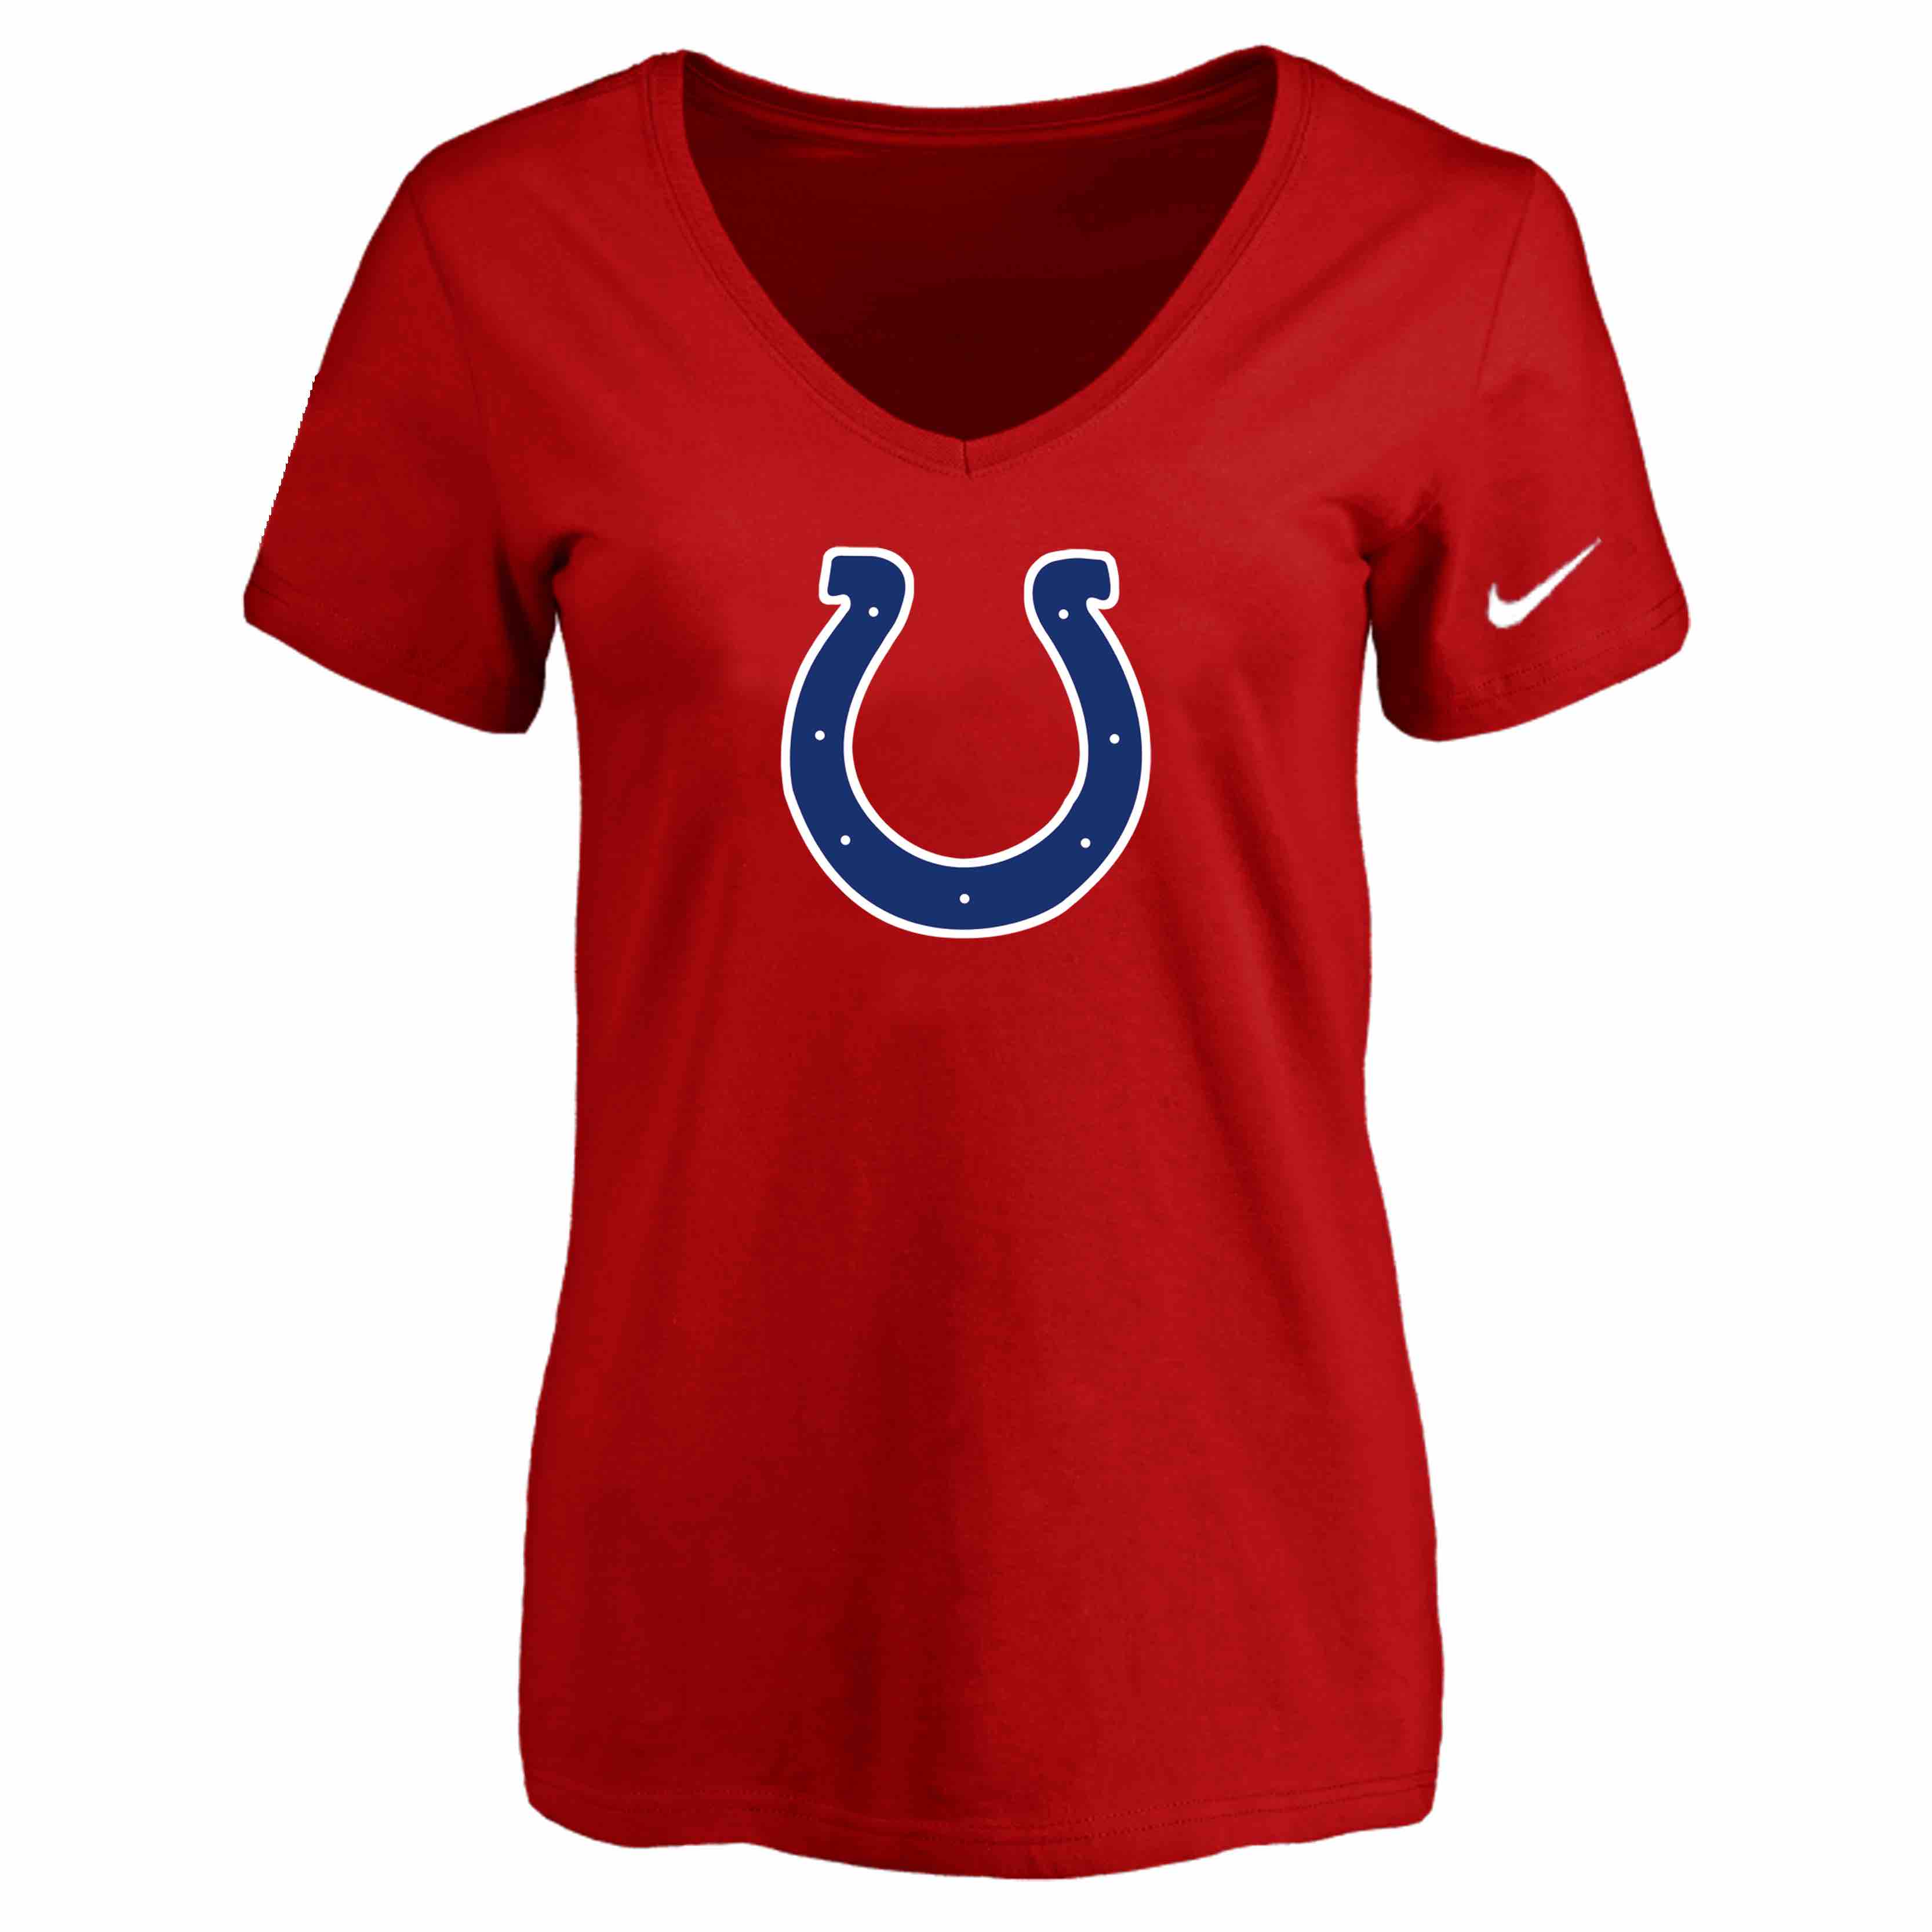 Indiannapolis Colts Red Womens Logo V-neck T-Shirt